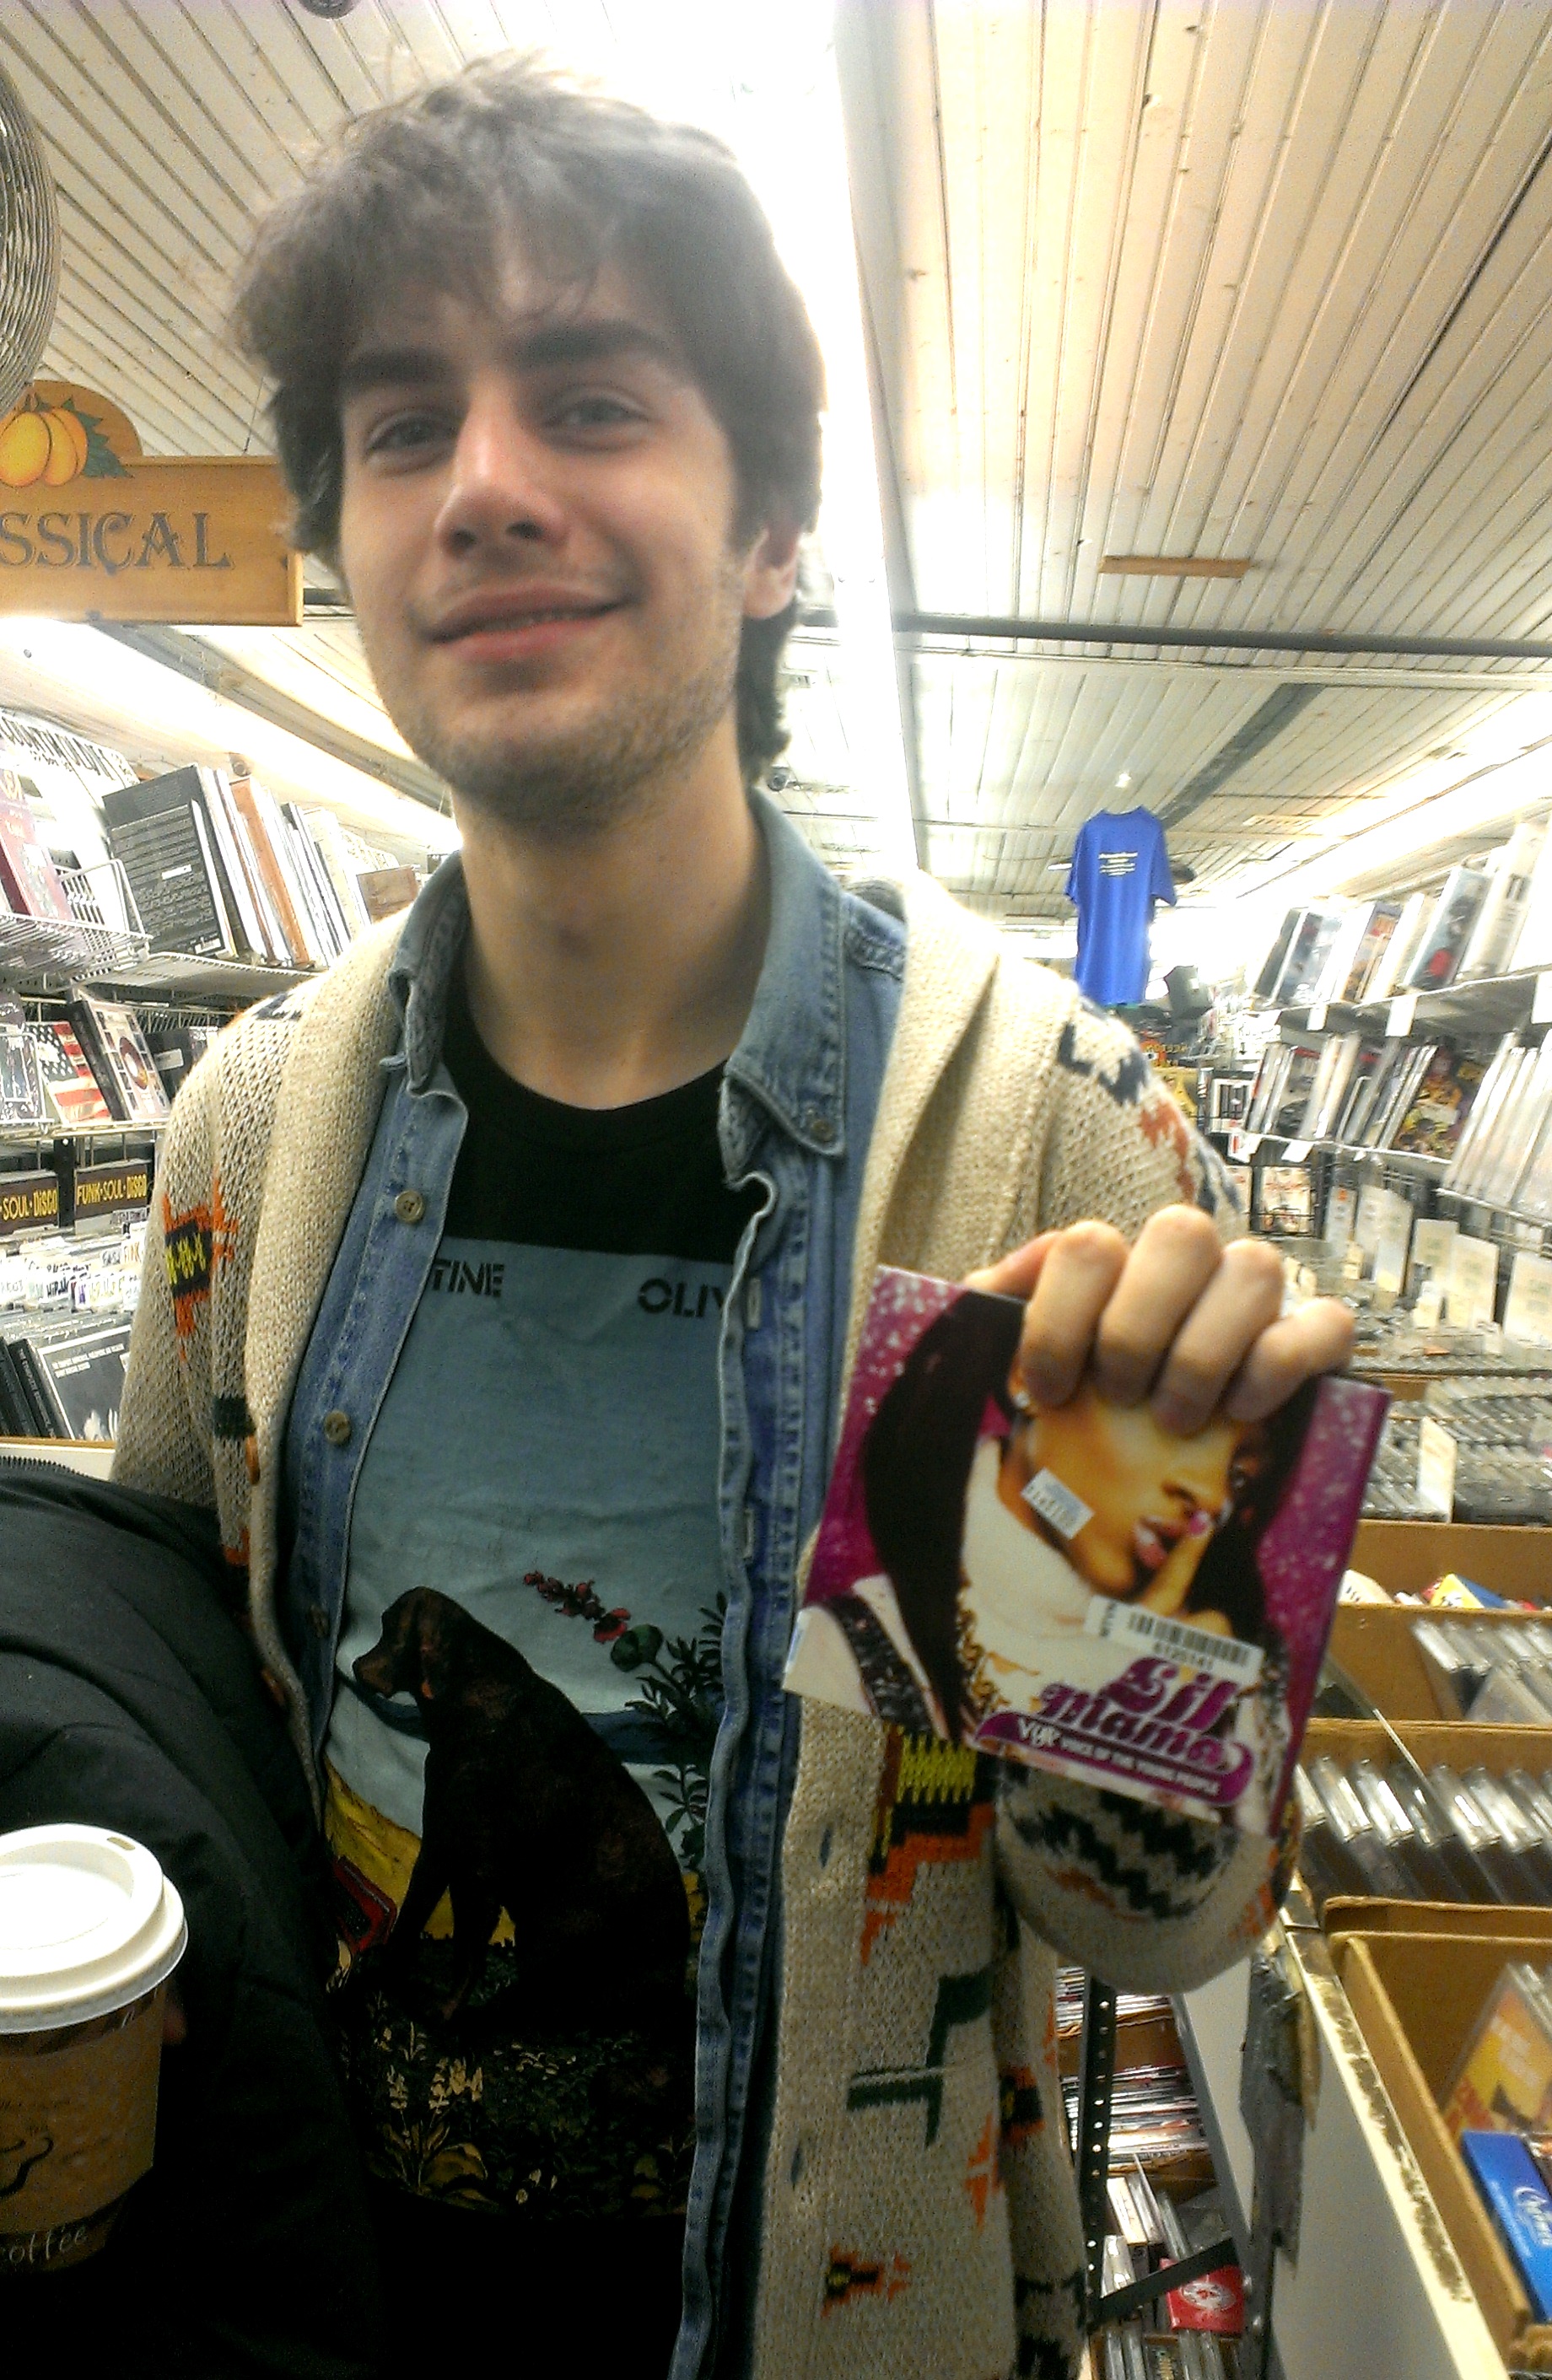 Chris with a pink CD